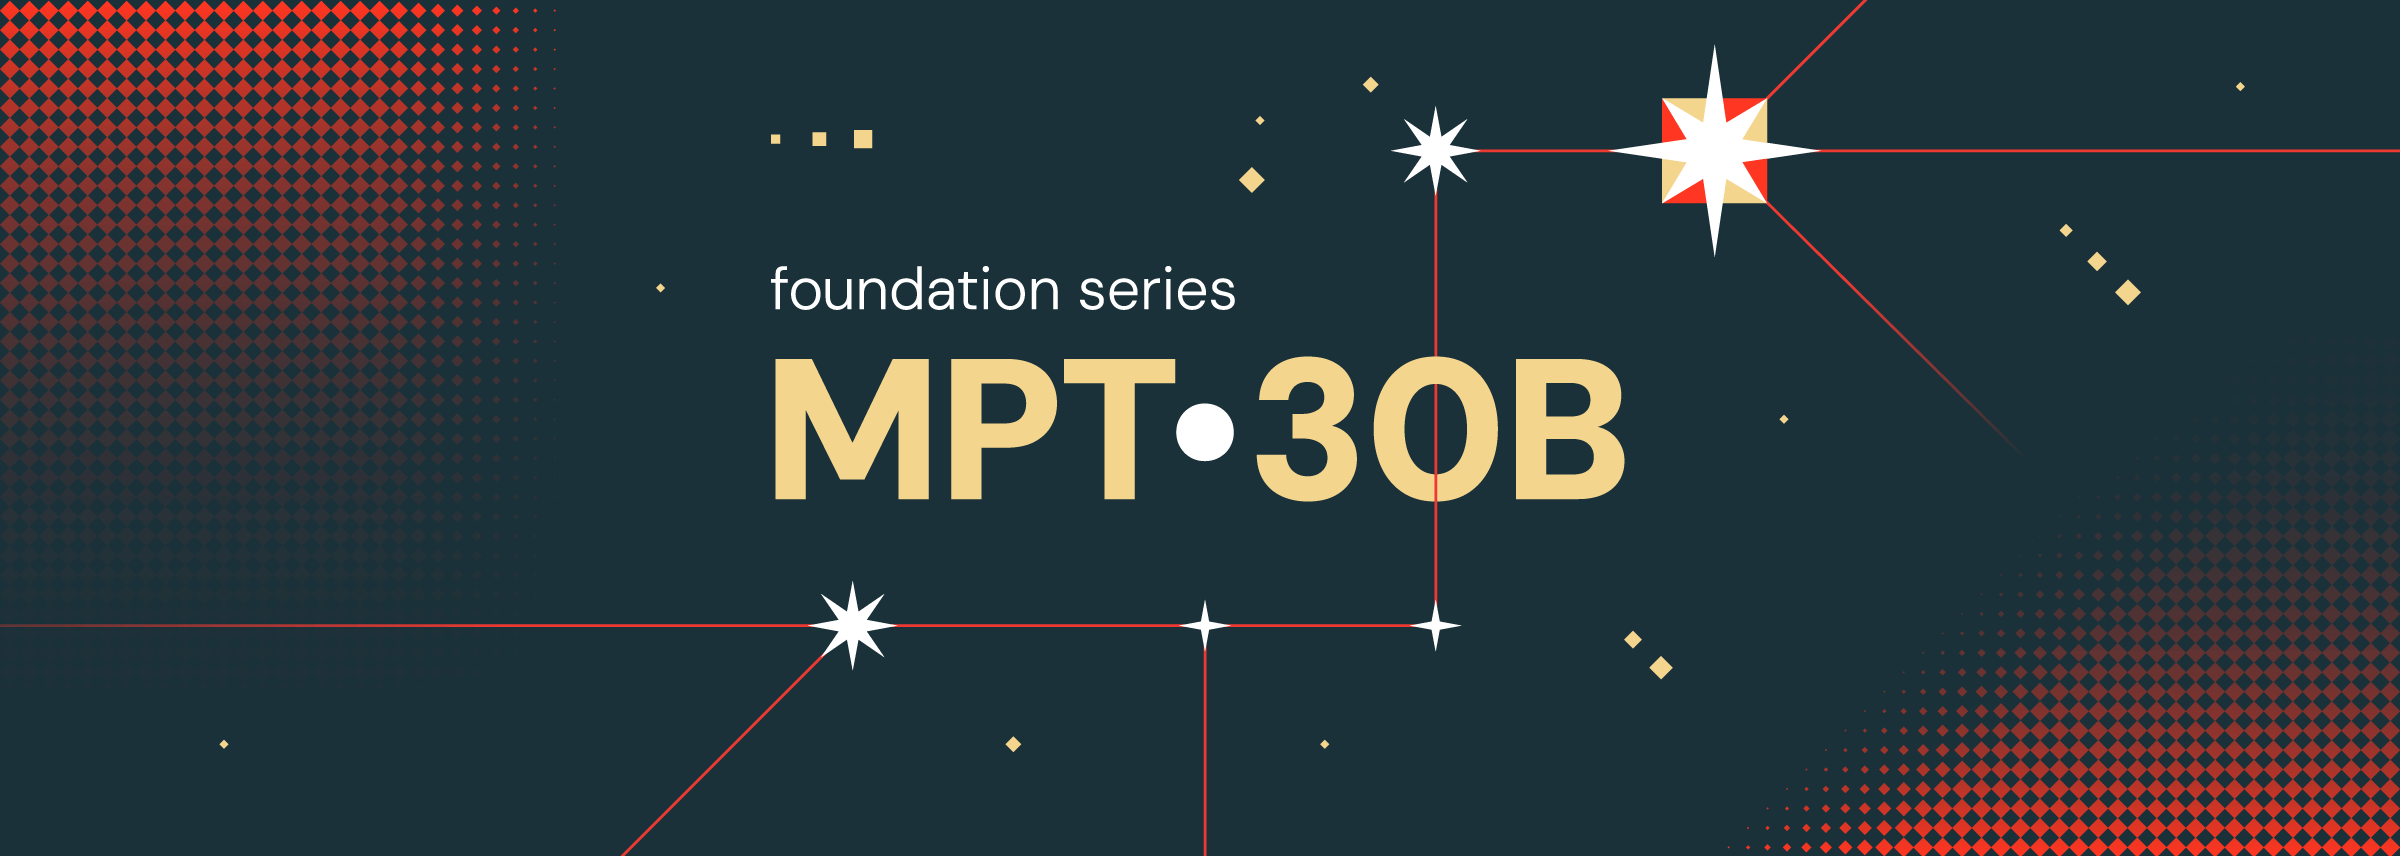 MPT-30B: Raising the bar for open-source foundation models